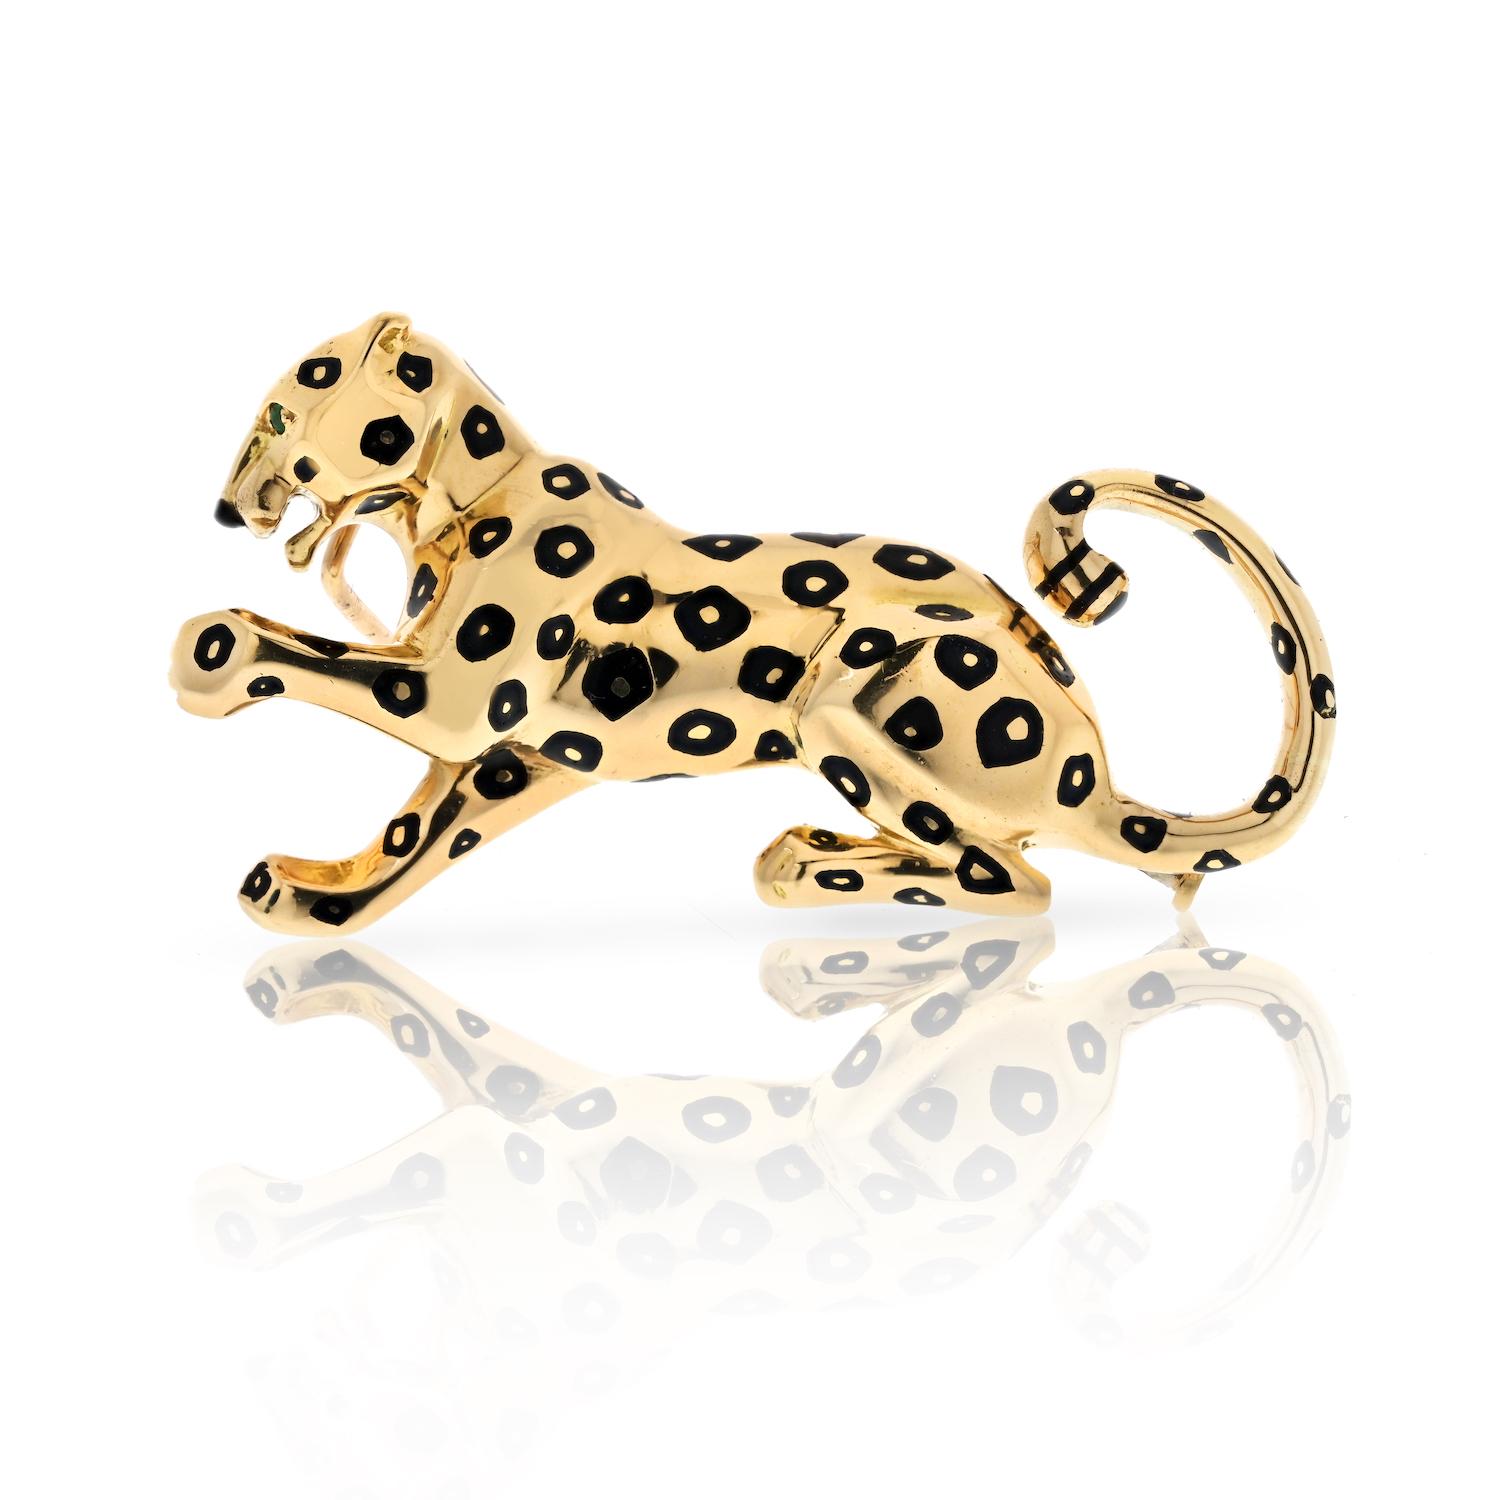 Show your fierce side with this Cartier panther pin. The iconic motif is crafted in high polish yellow gold with black enamel spots in a ferocious pose.

Length: 1.75 inches (approx.)
Height: 0.75 inches (approx.)
Fully hallmarked, Cartier serial